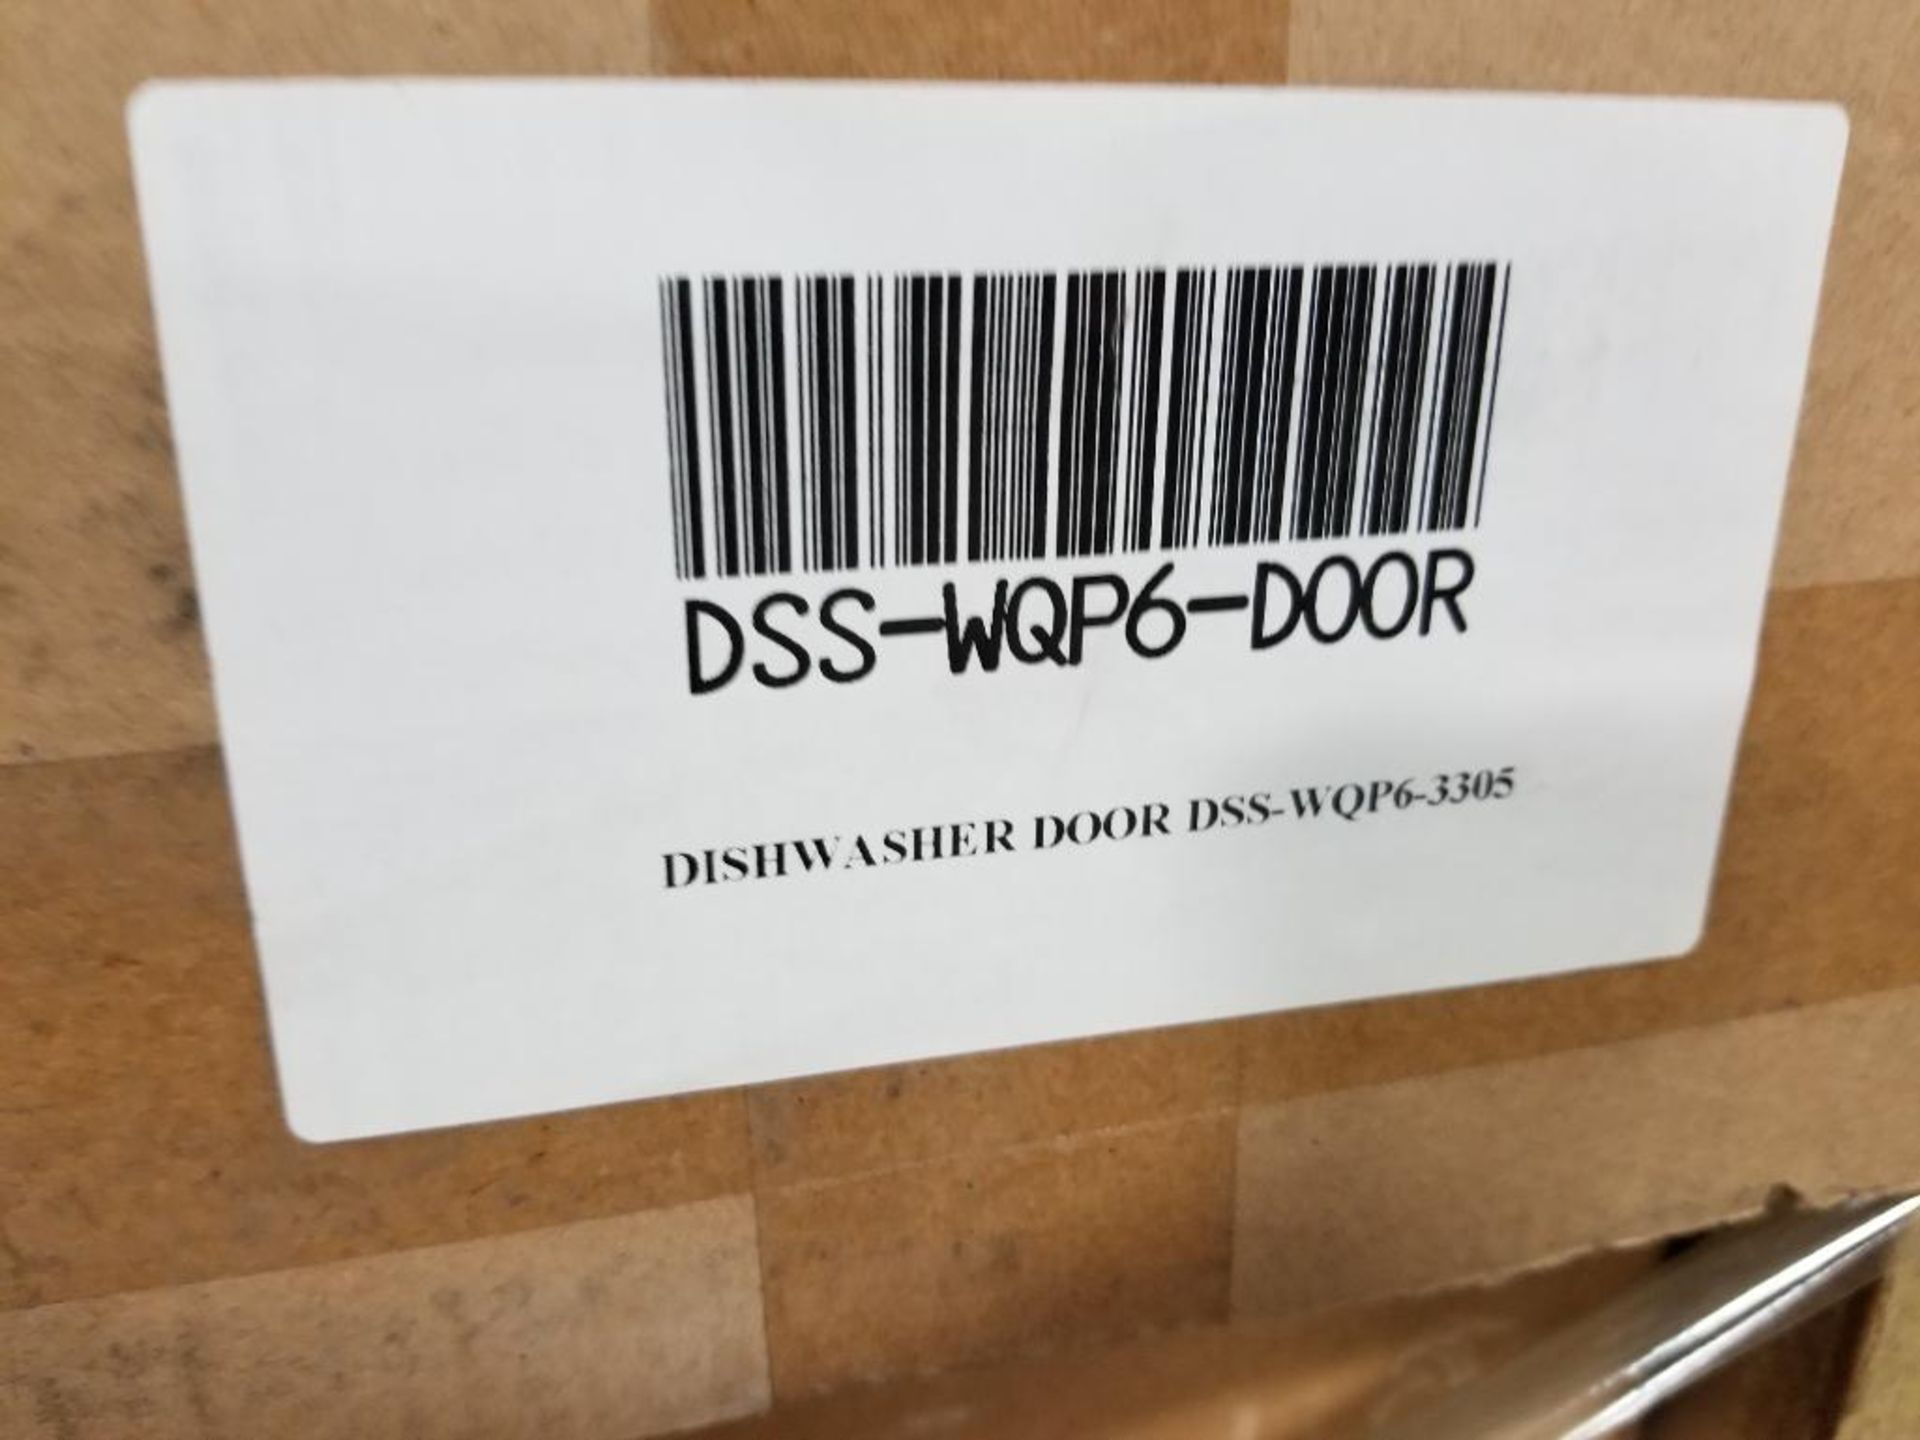 Qty 9 - dishwasher door DSS-WQP6-3305. New in box. - Image 3 of 4